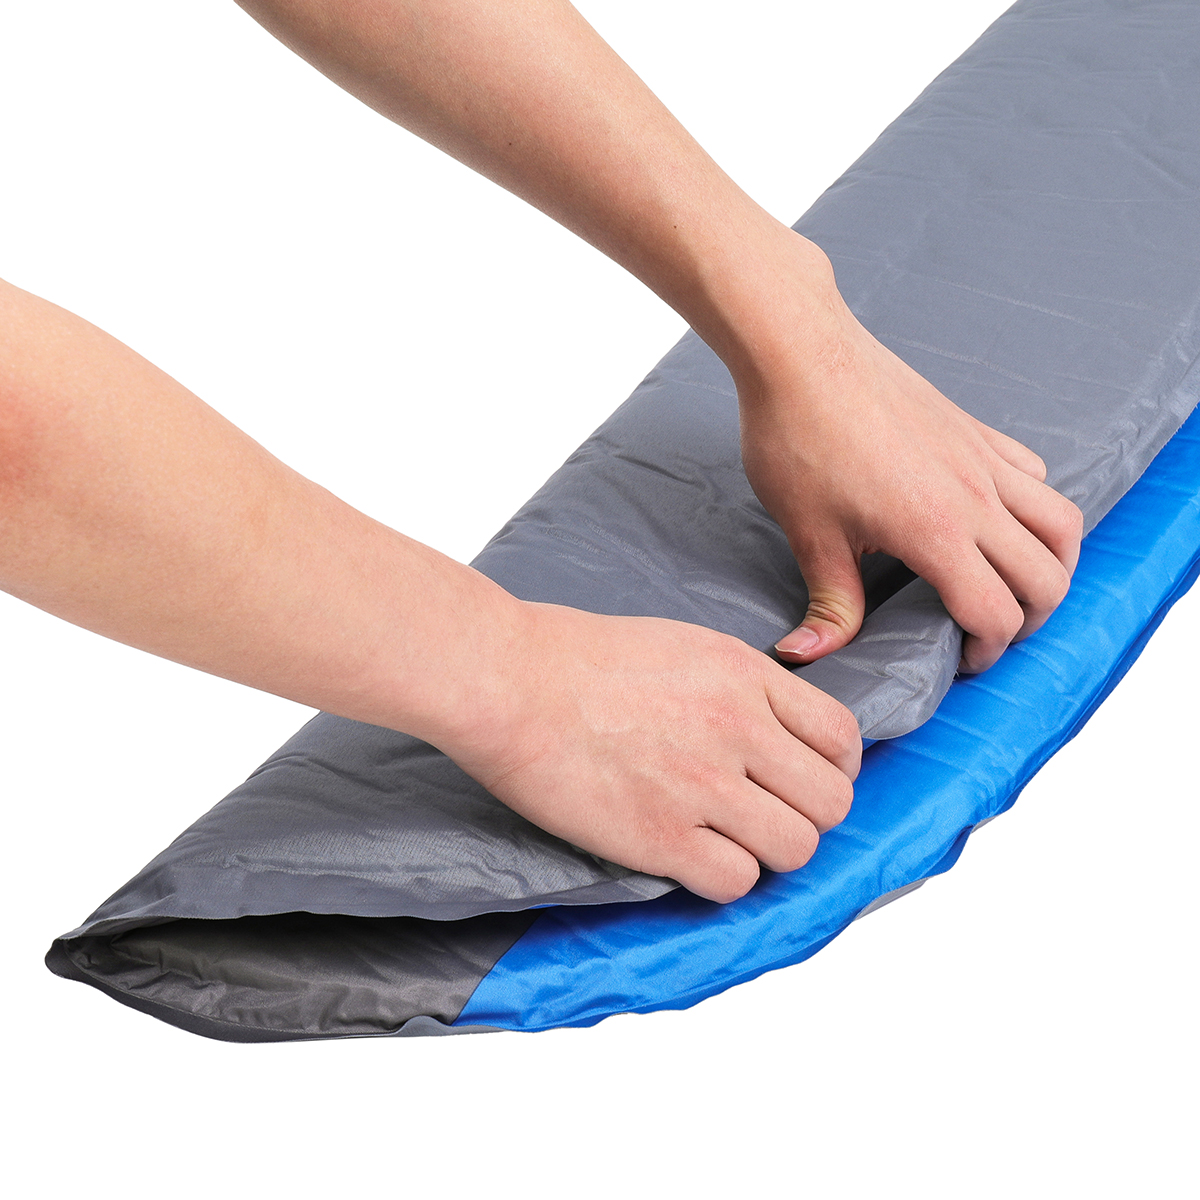 SGODDE-Inflatable-Sleeping-Mat-with-Pillow-Self-Inflating-Sleeping-Pad-Roll-Up-Foam-Bed-Pads-for-Out-1883996-16